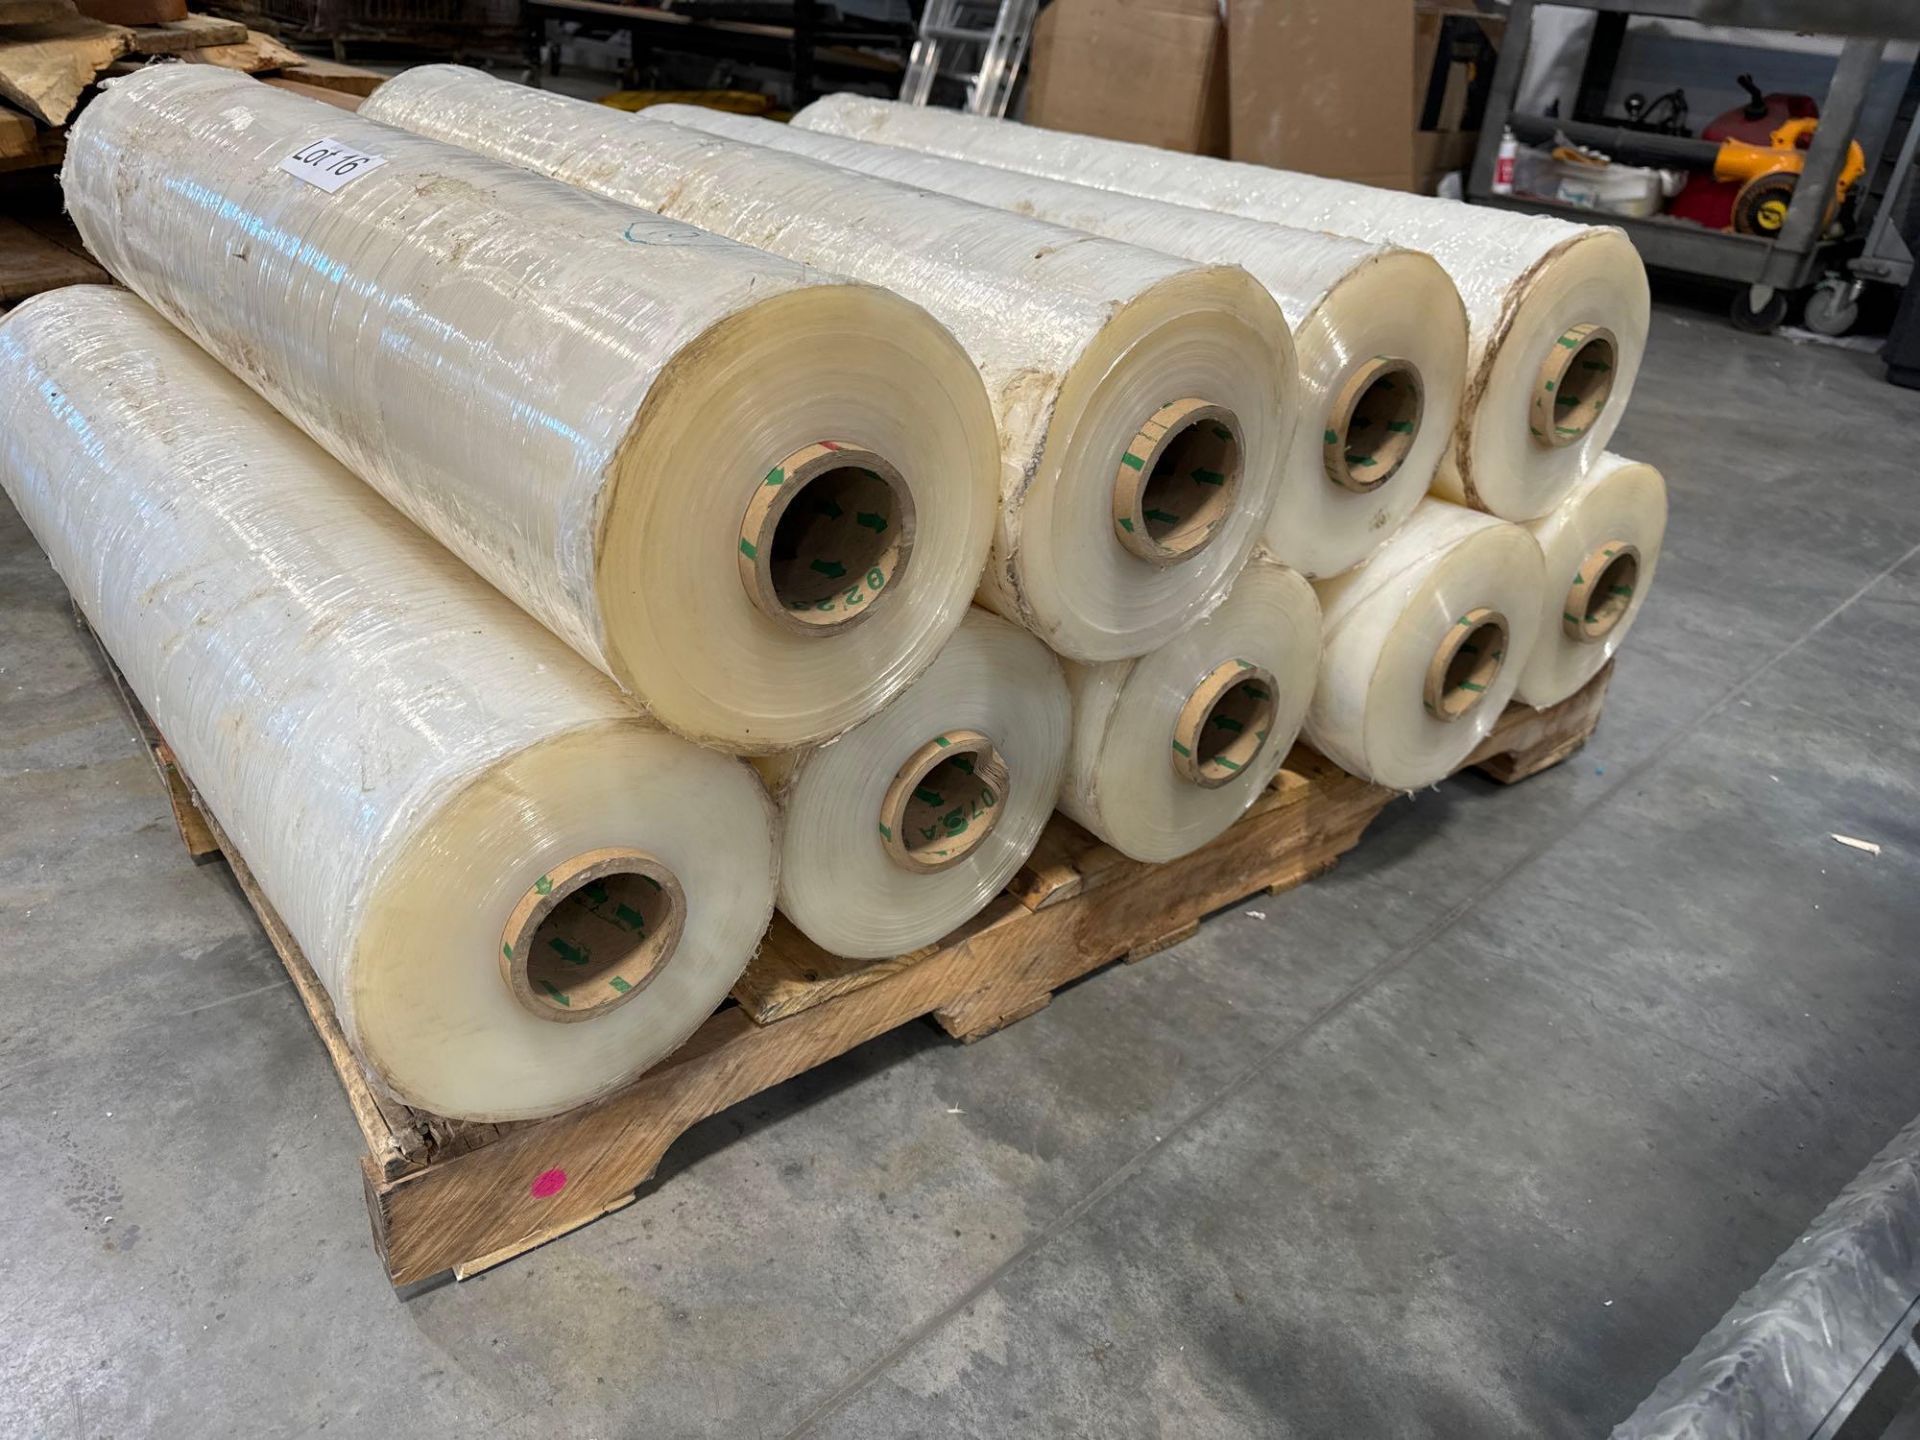 9 Large rolls of plastic wrap - Image 2 of 3